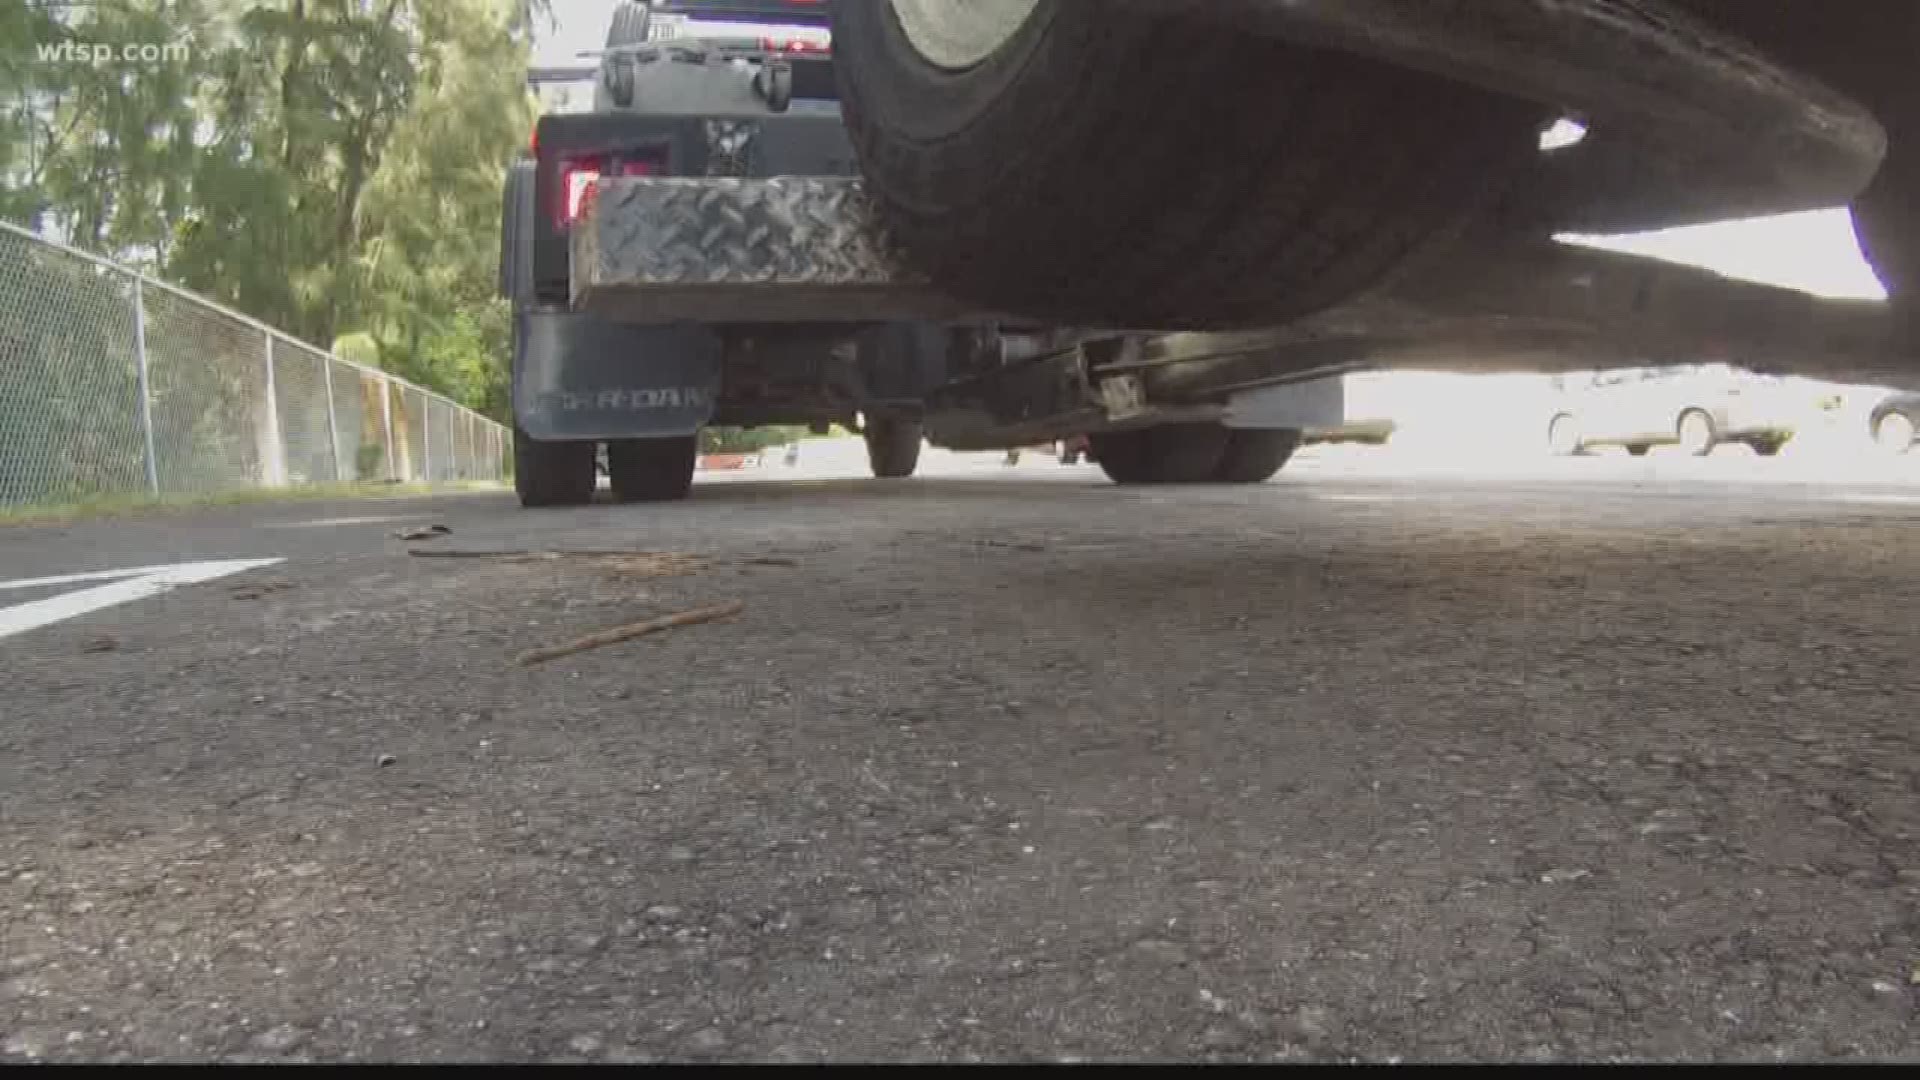 After 10Investigates got involved, towing rules are being rewritten.